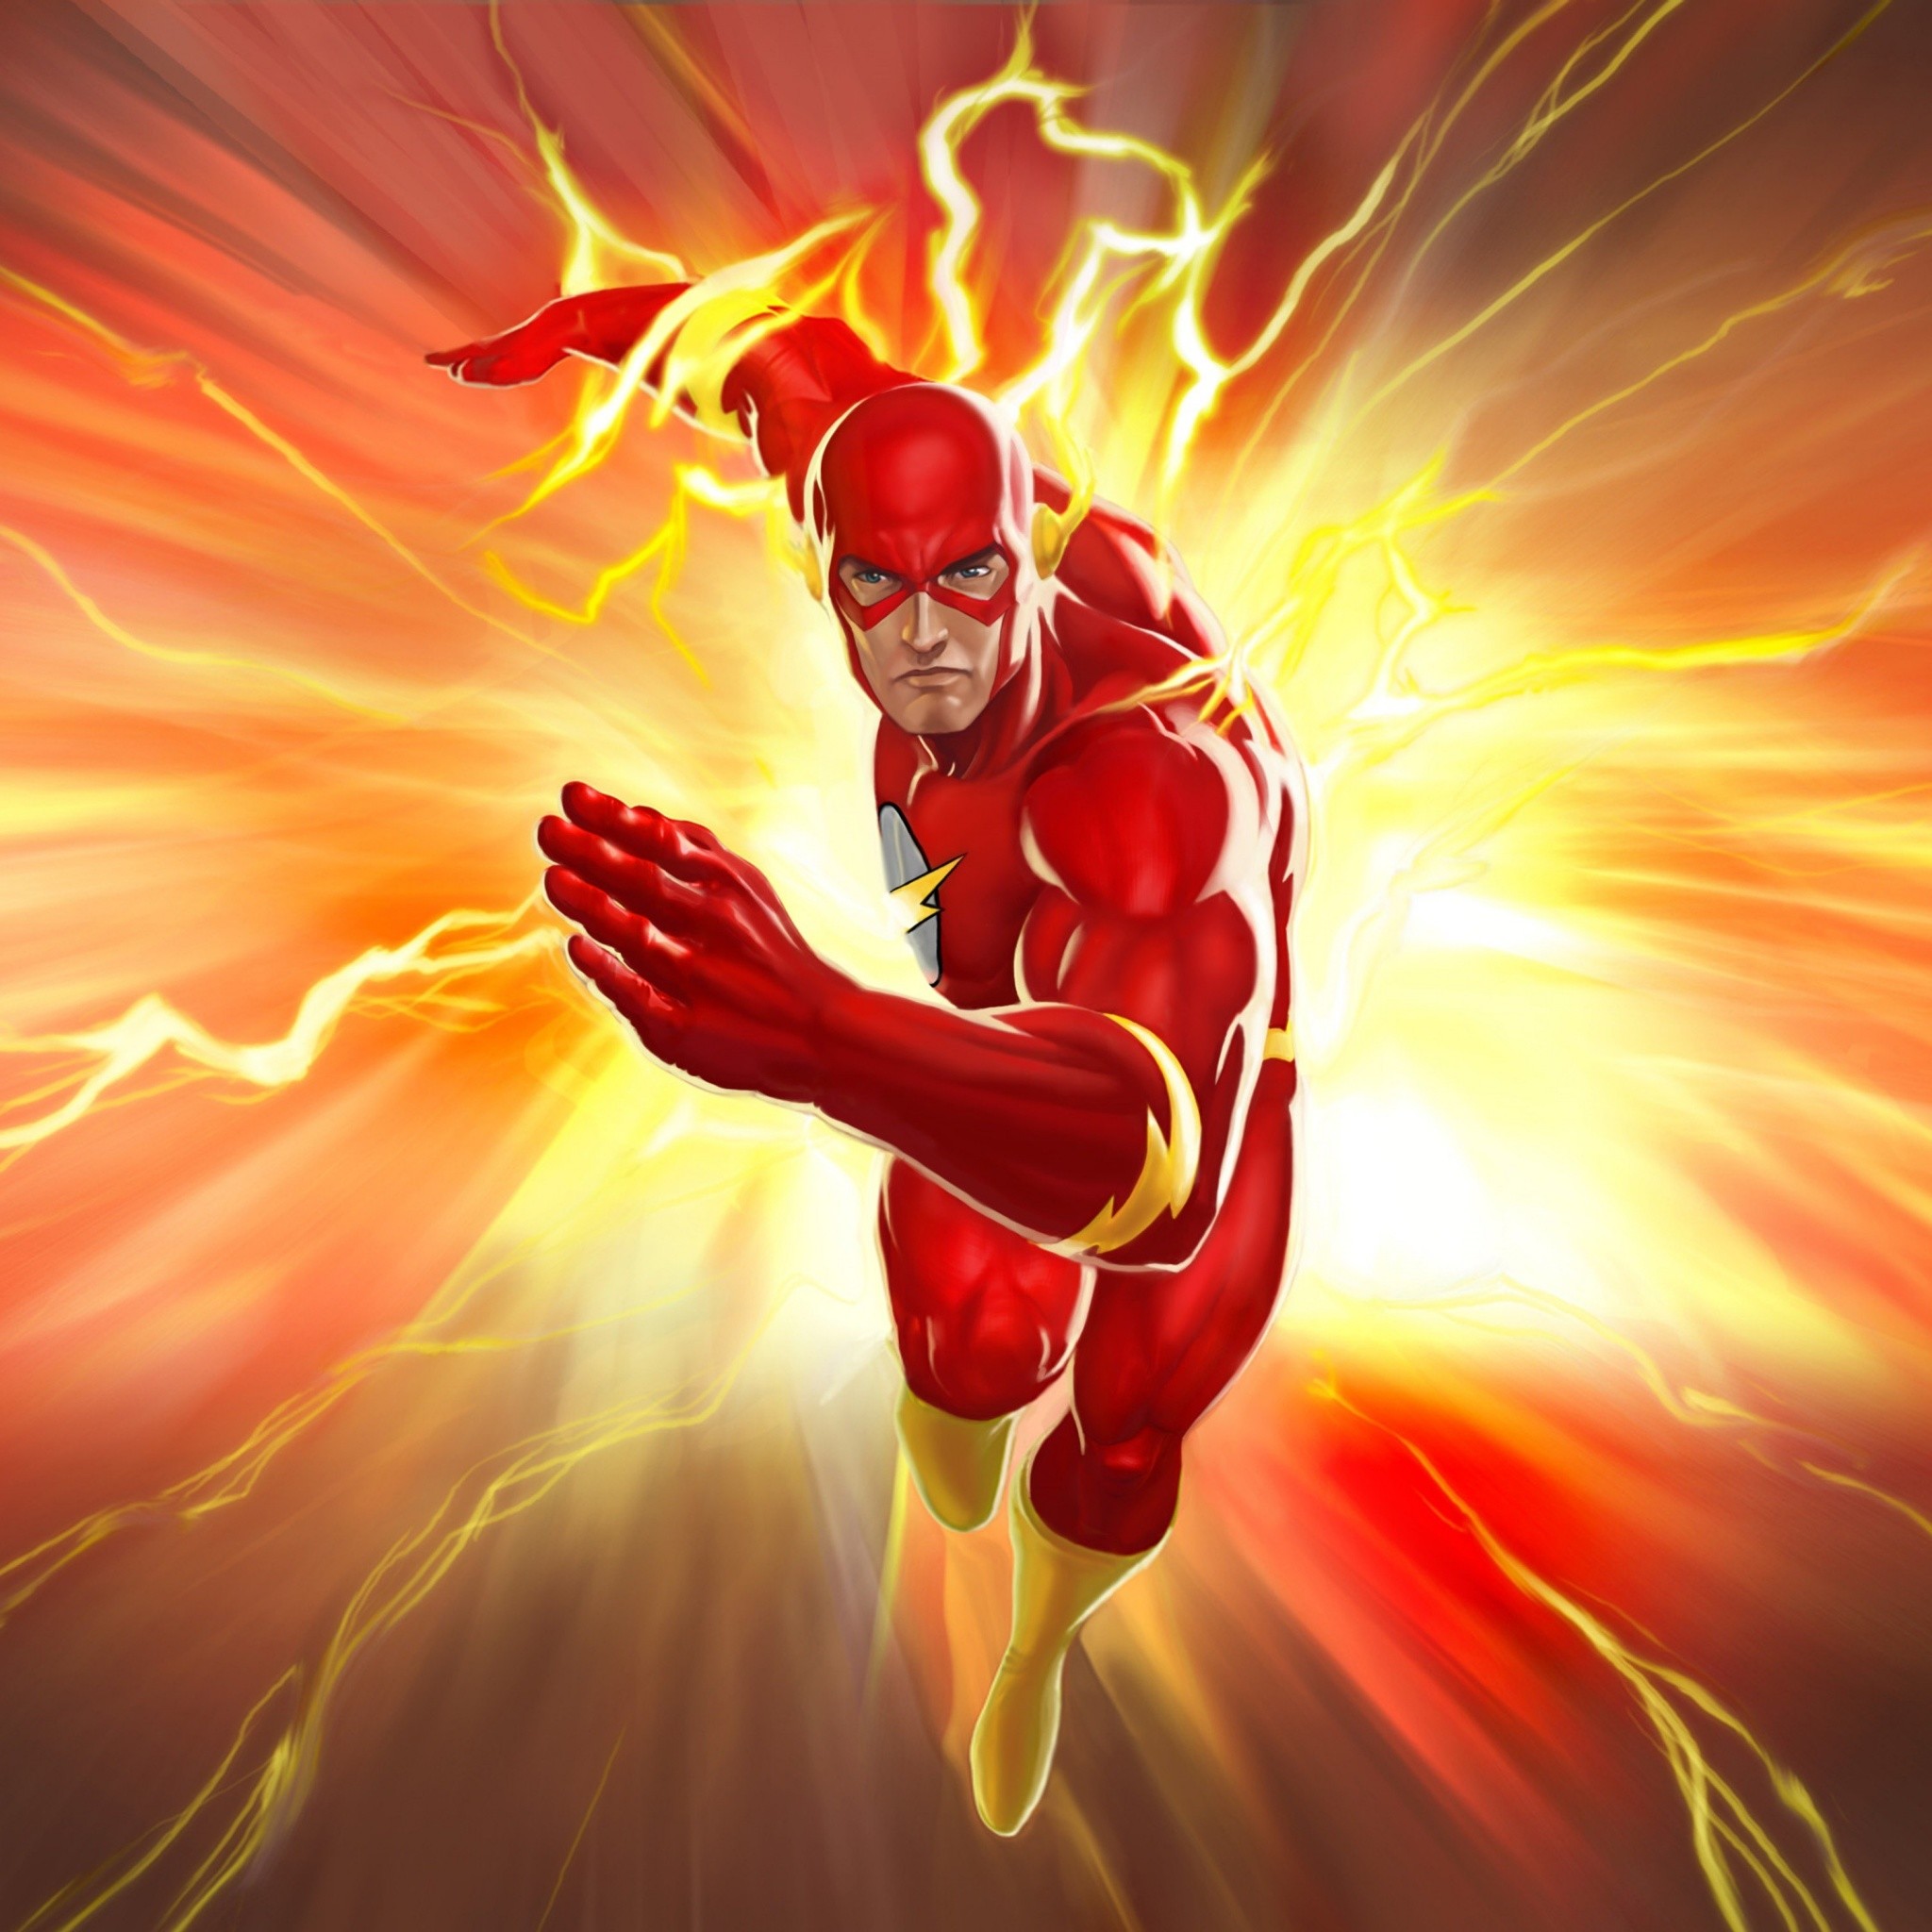 Flashing The Flash. Tap to see more Barry Allen The Flash iPhone, iPad Android wallpapers, backgrounds, fondos